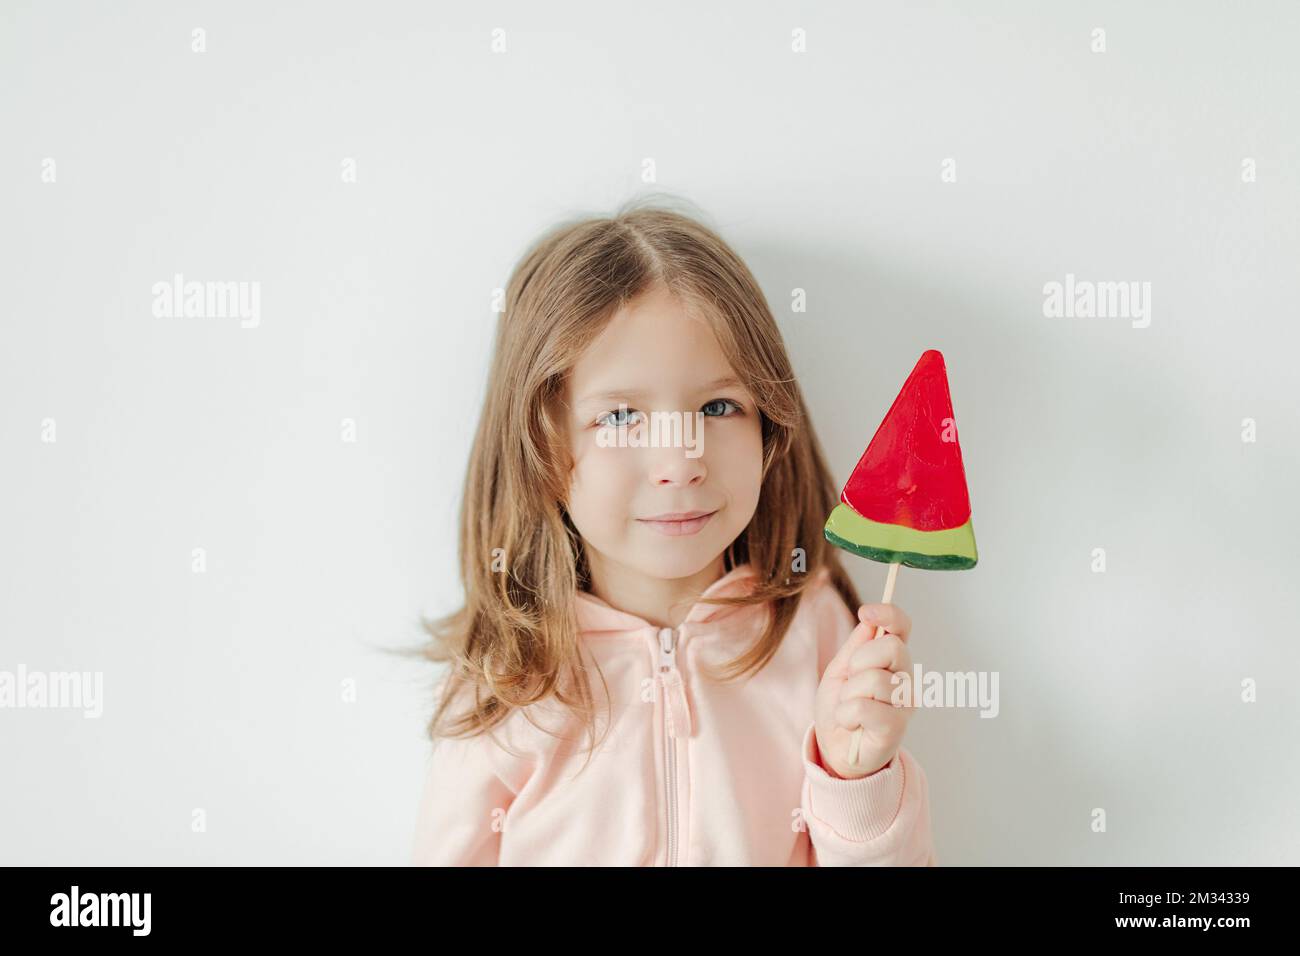 Cute little girl with watermelon lollipop. White background. Vacation and summer mood concept Stock Photo